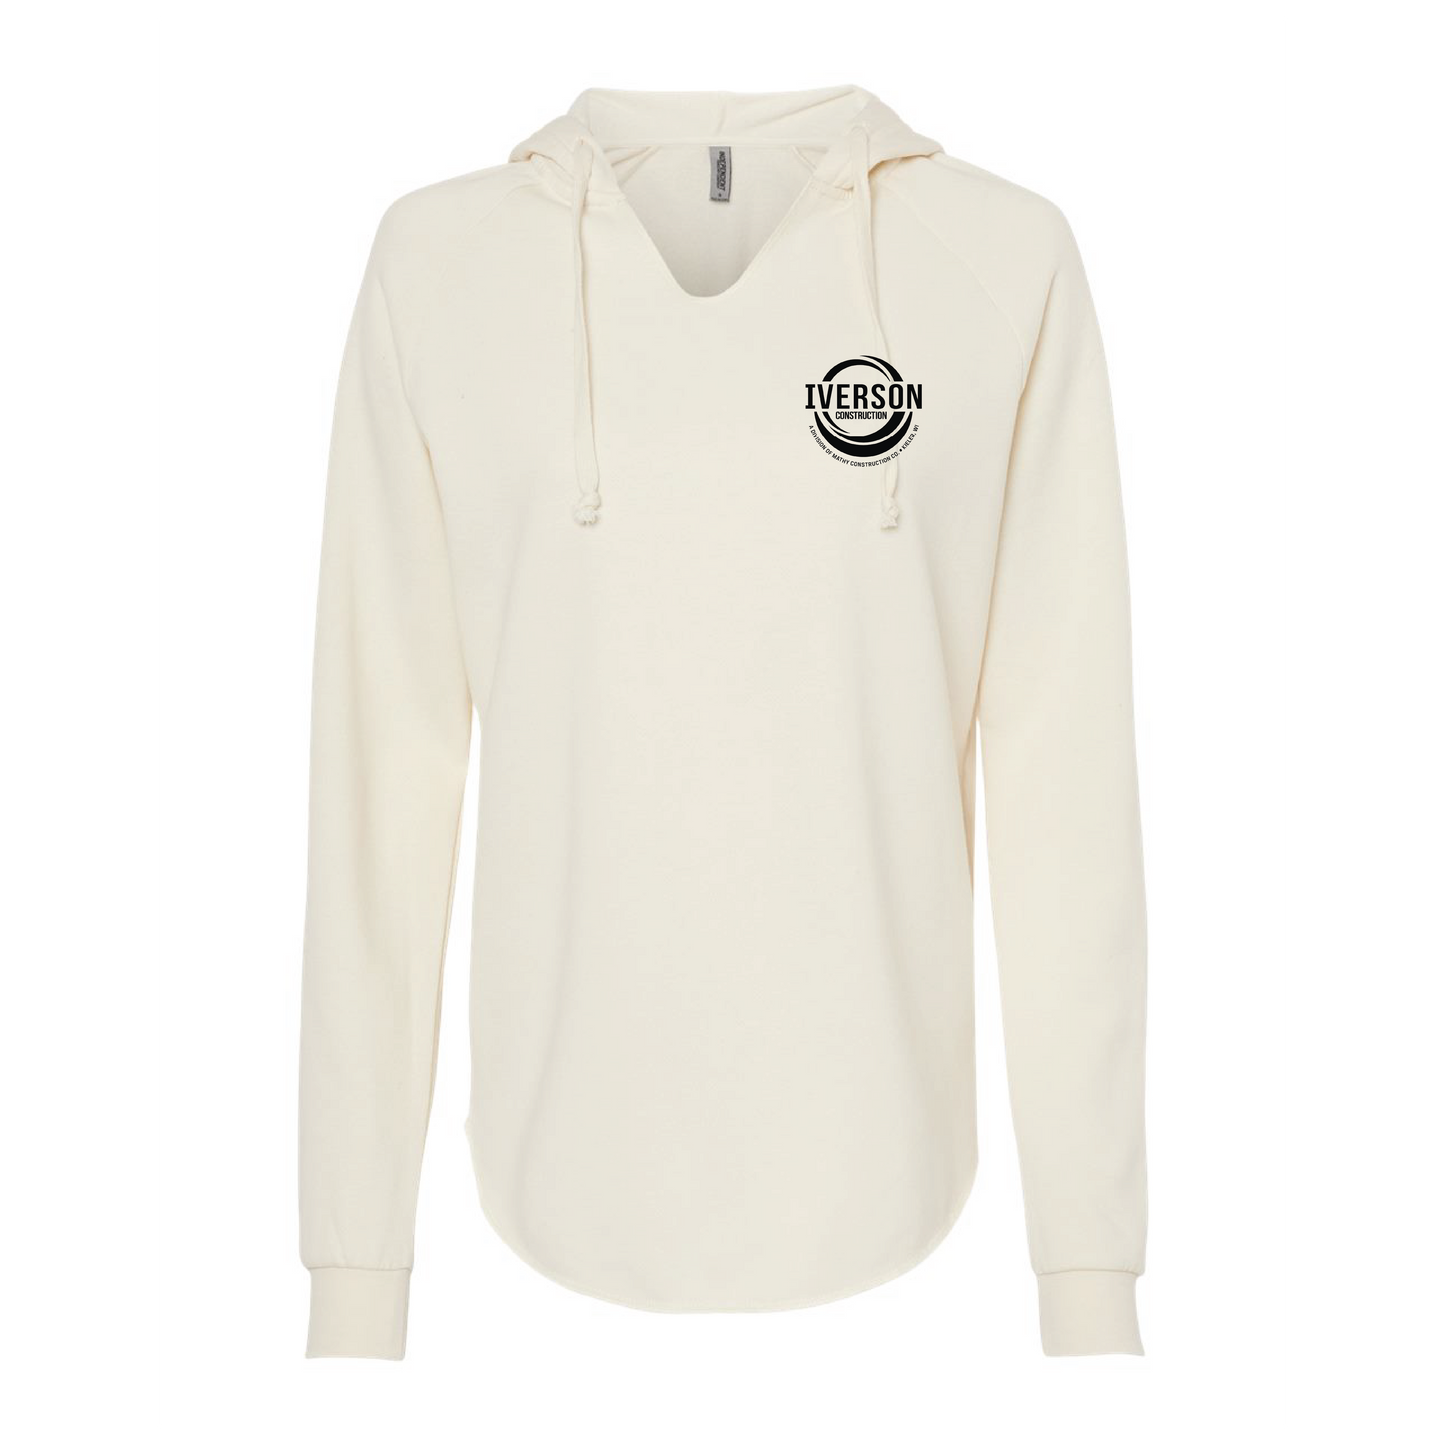 Iverson Construction Limited Edition Ladies Fleece